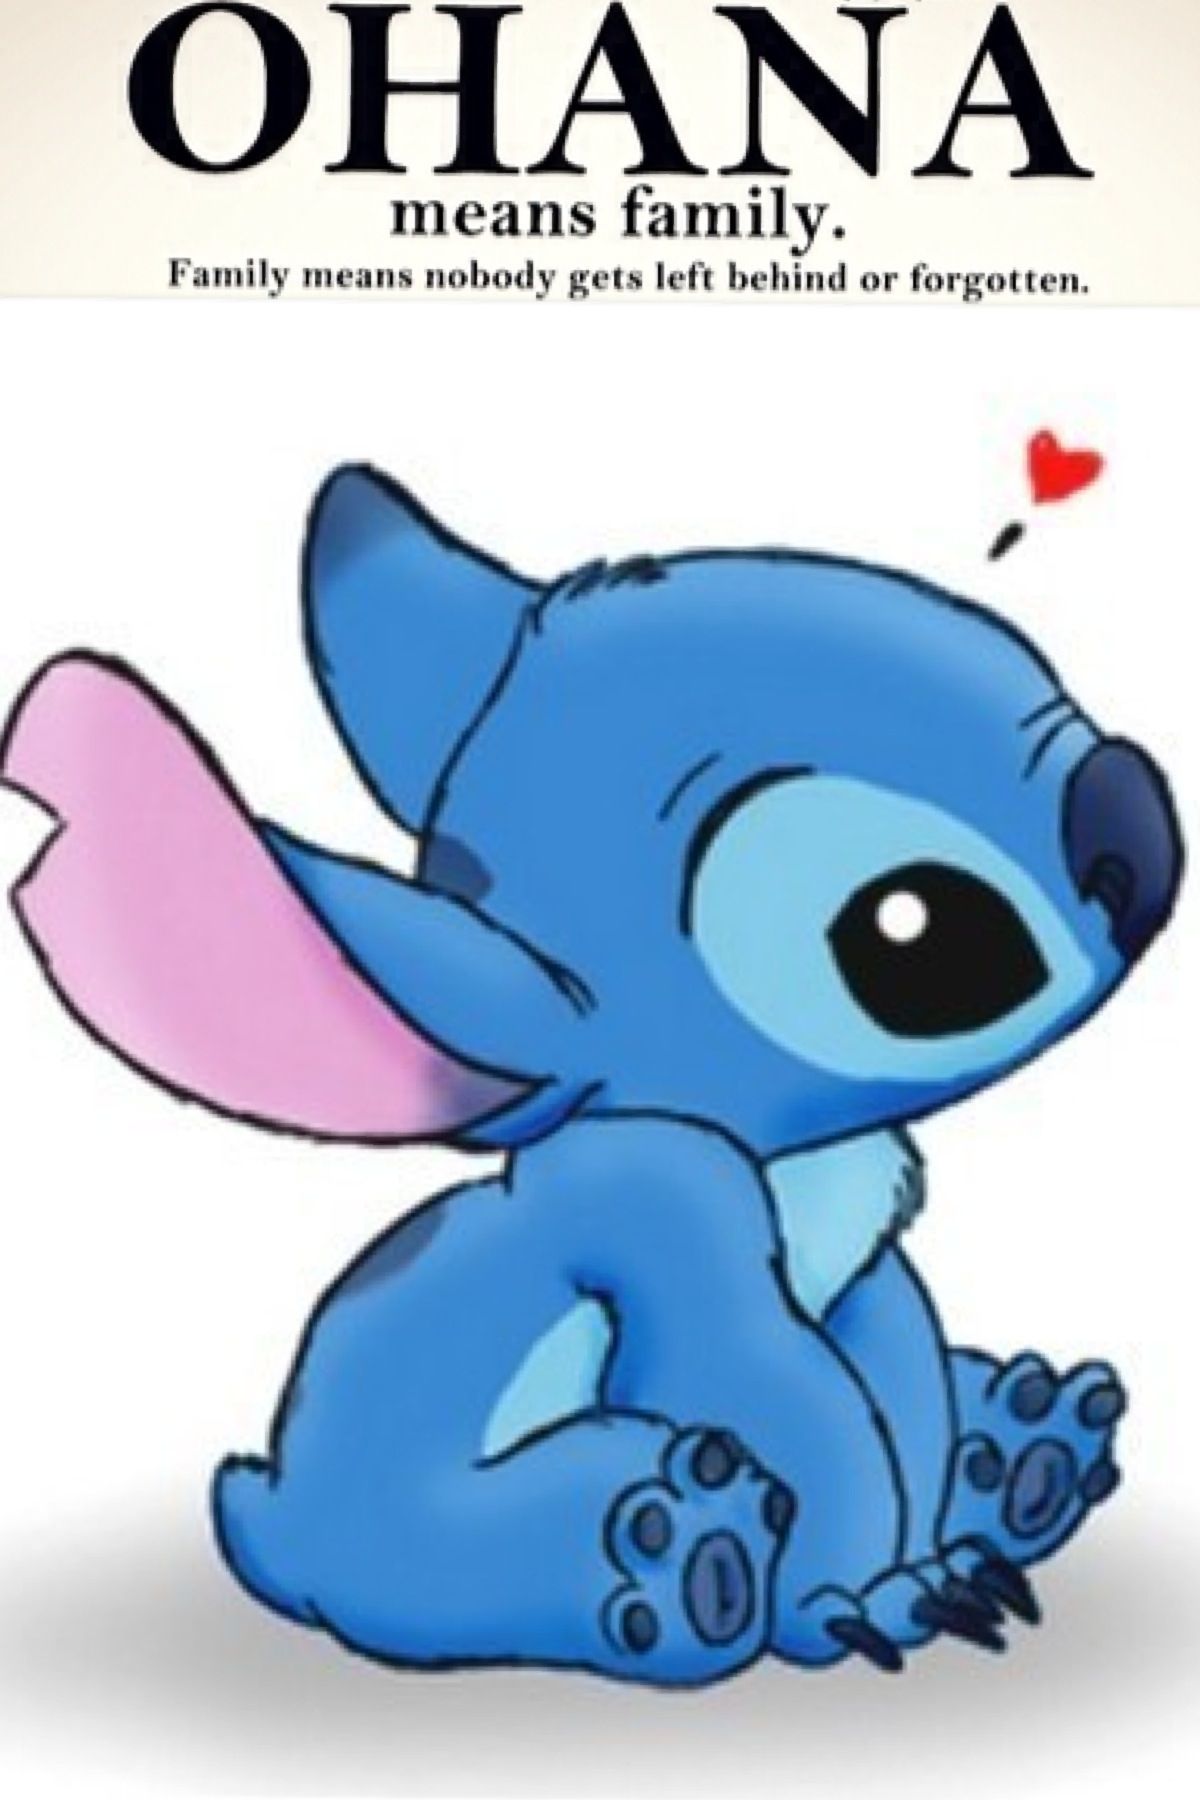 Quotes. Disney quote wallpaper, Lilo and stitch quotes, Stitch drawing